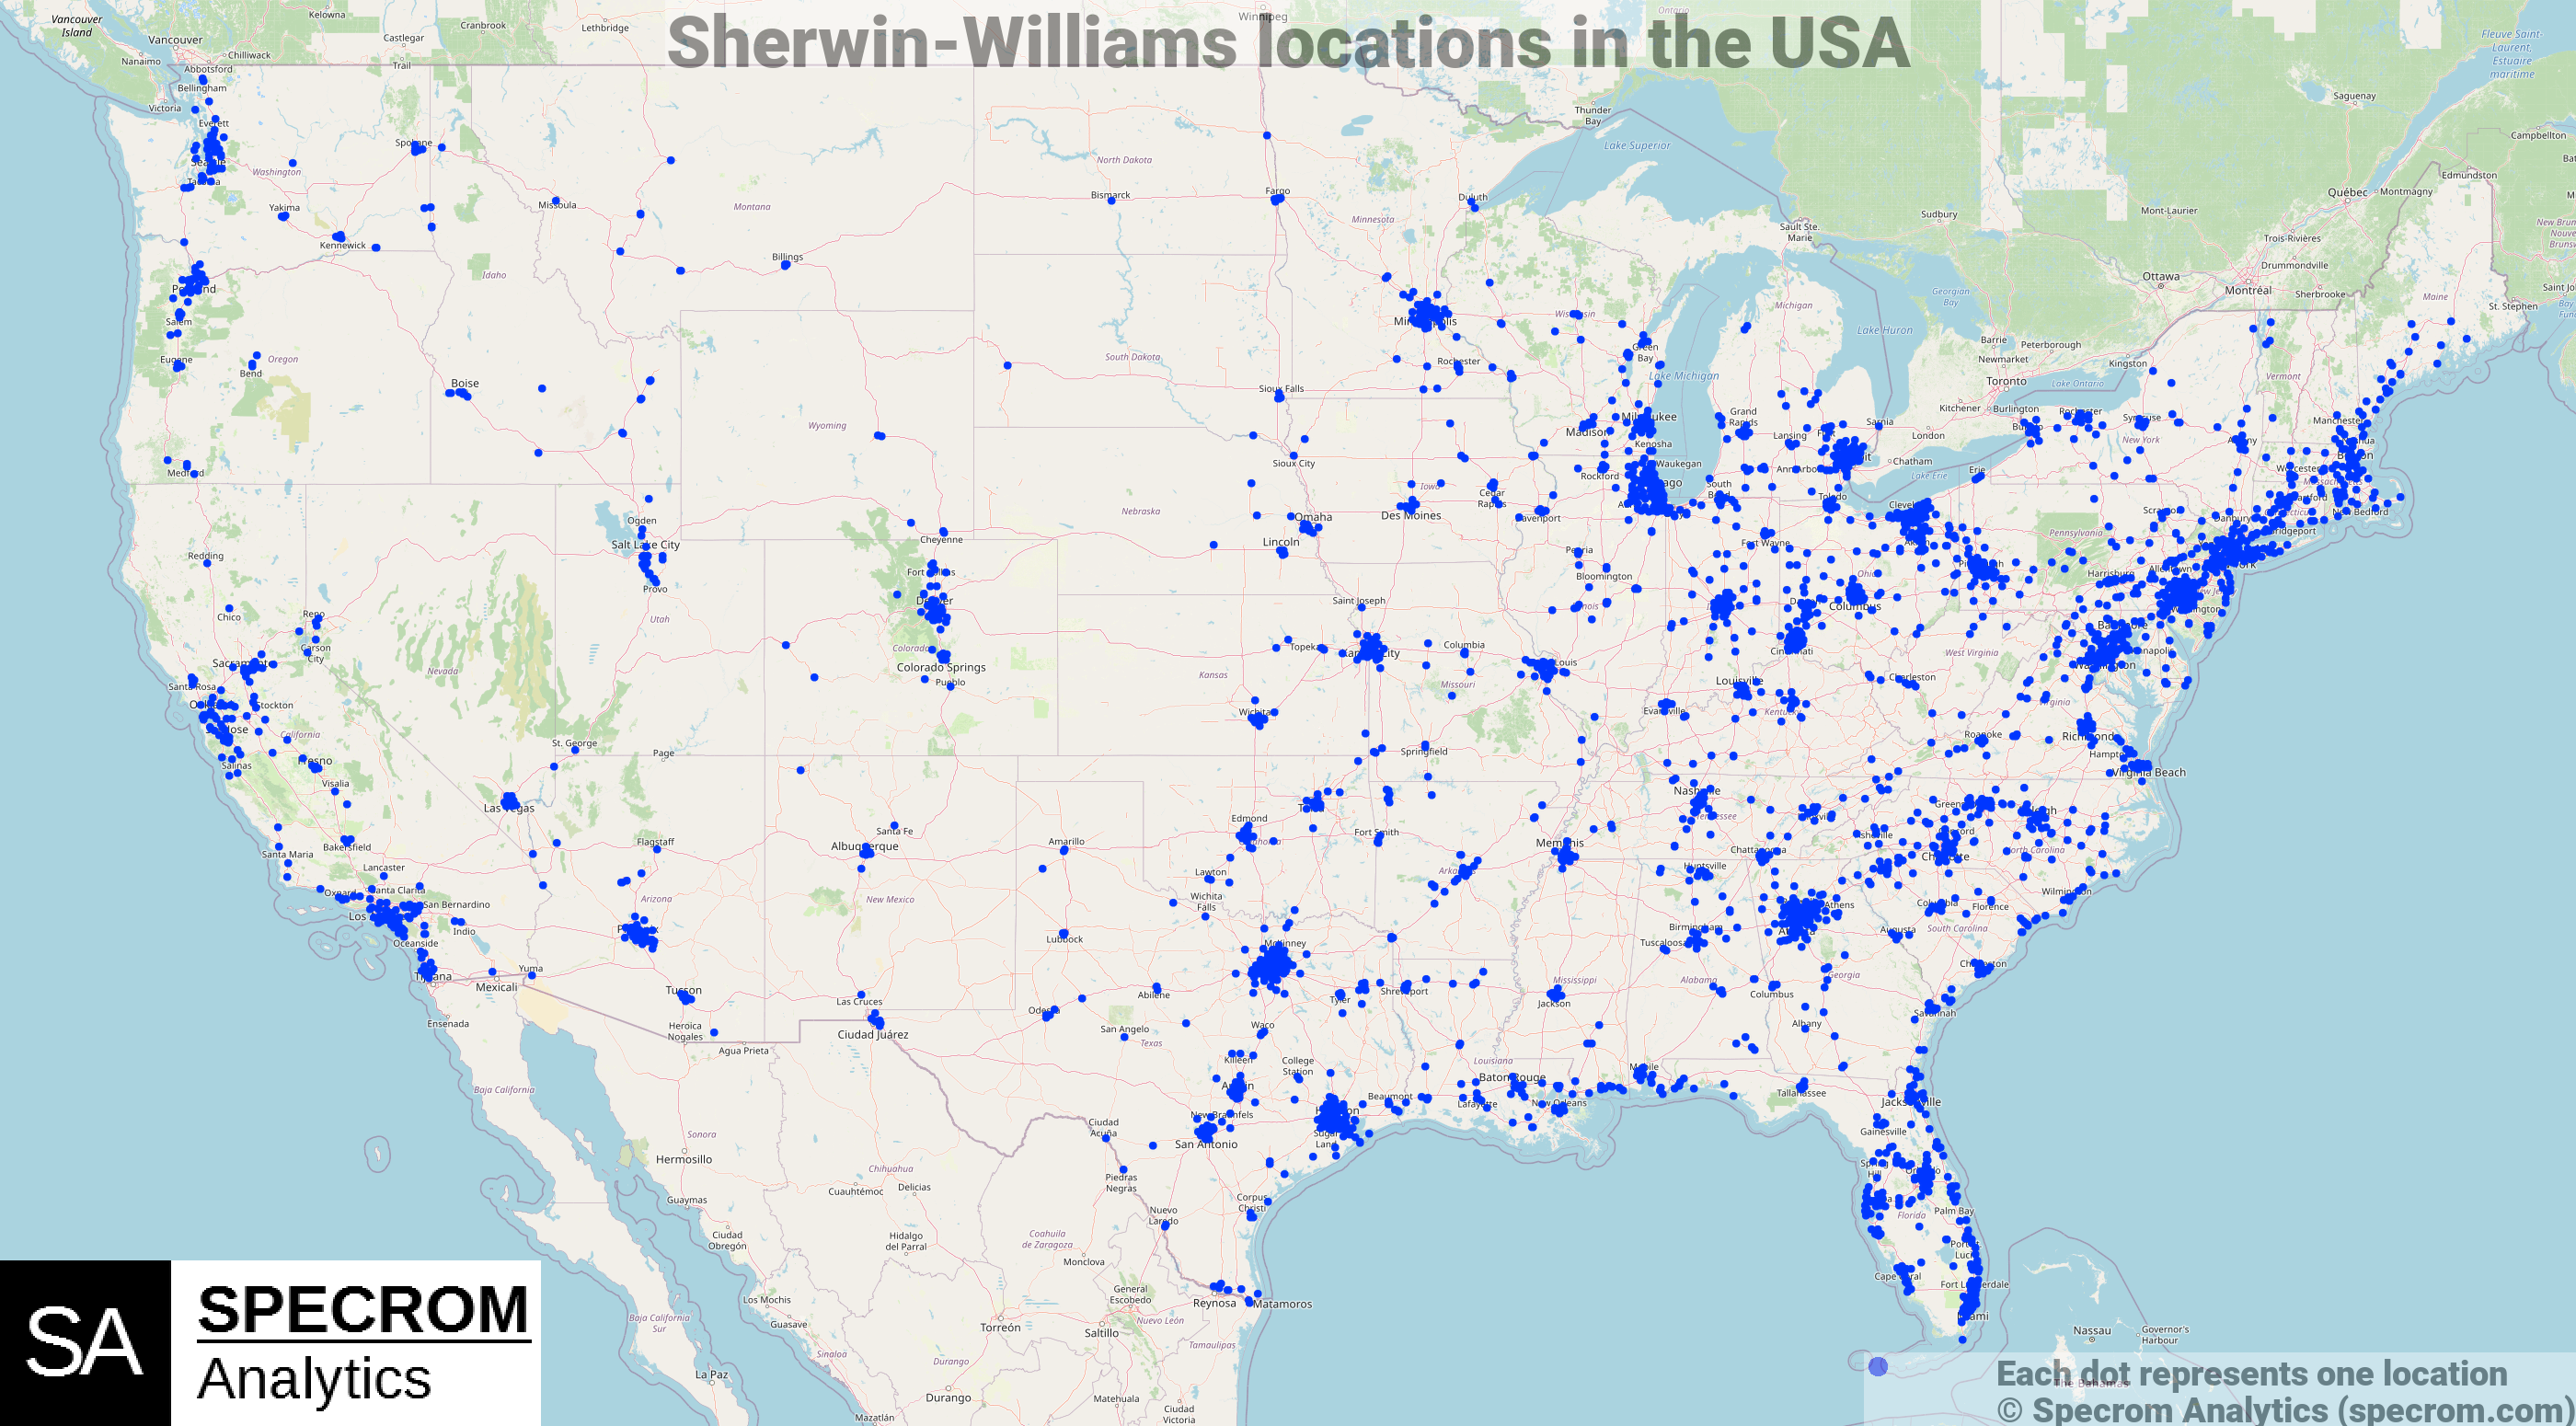 Sherwin-Williams locations in the USA